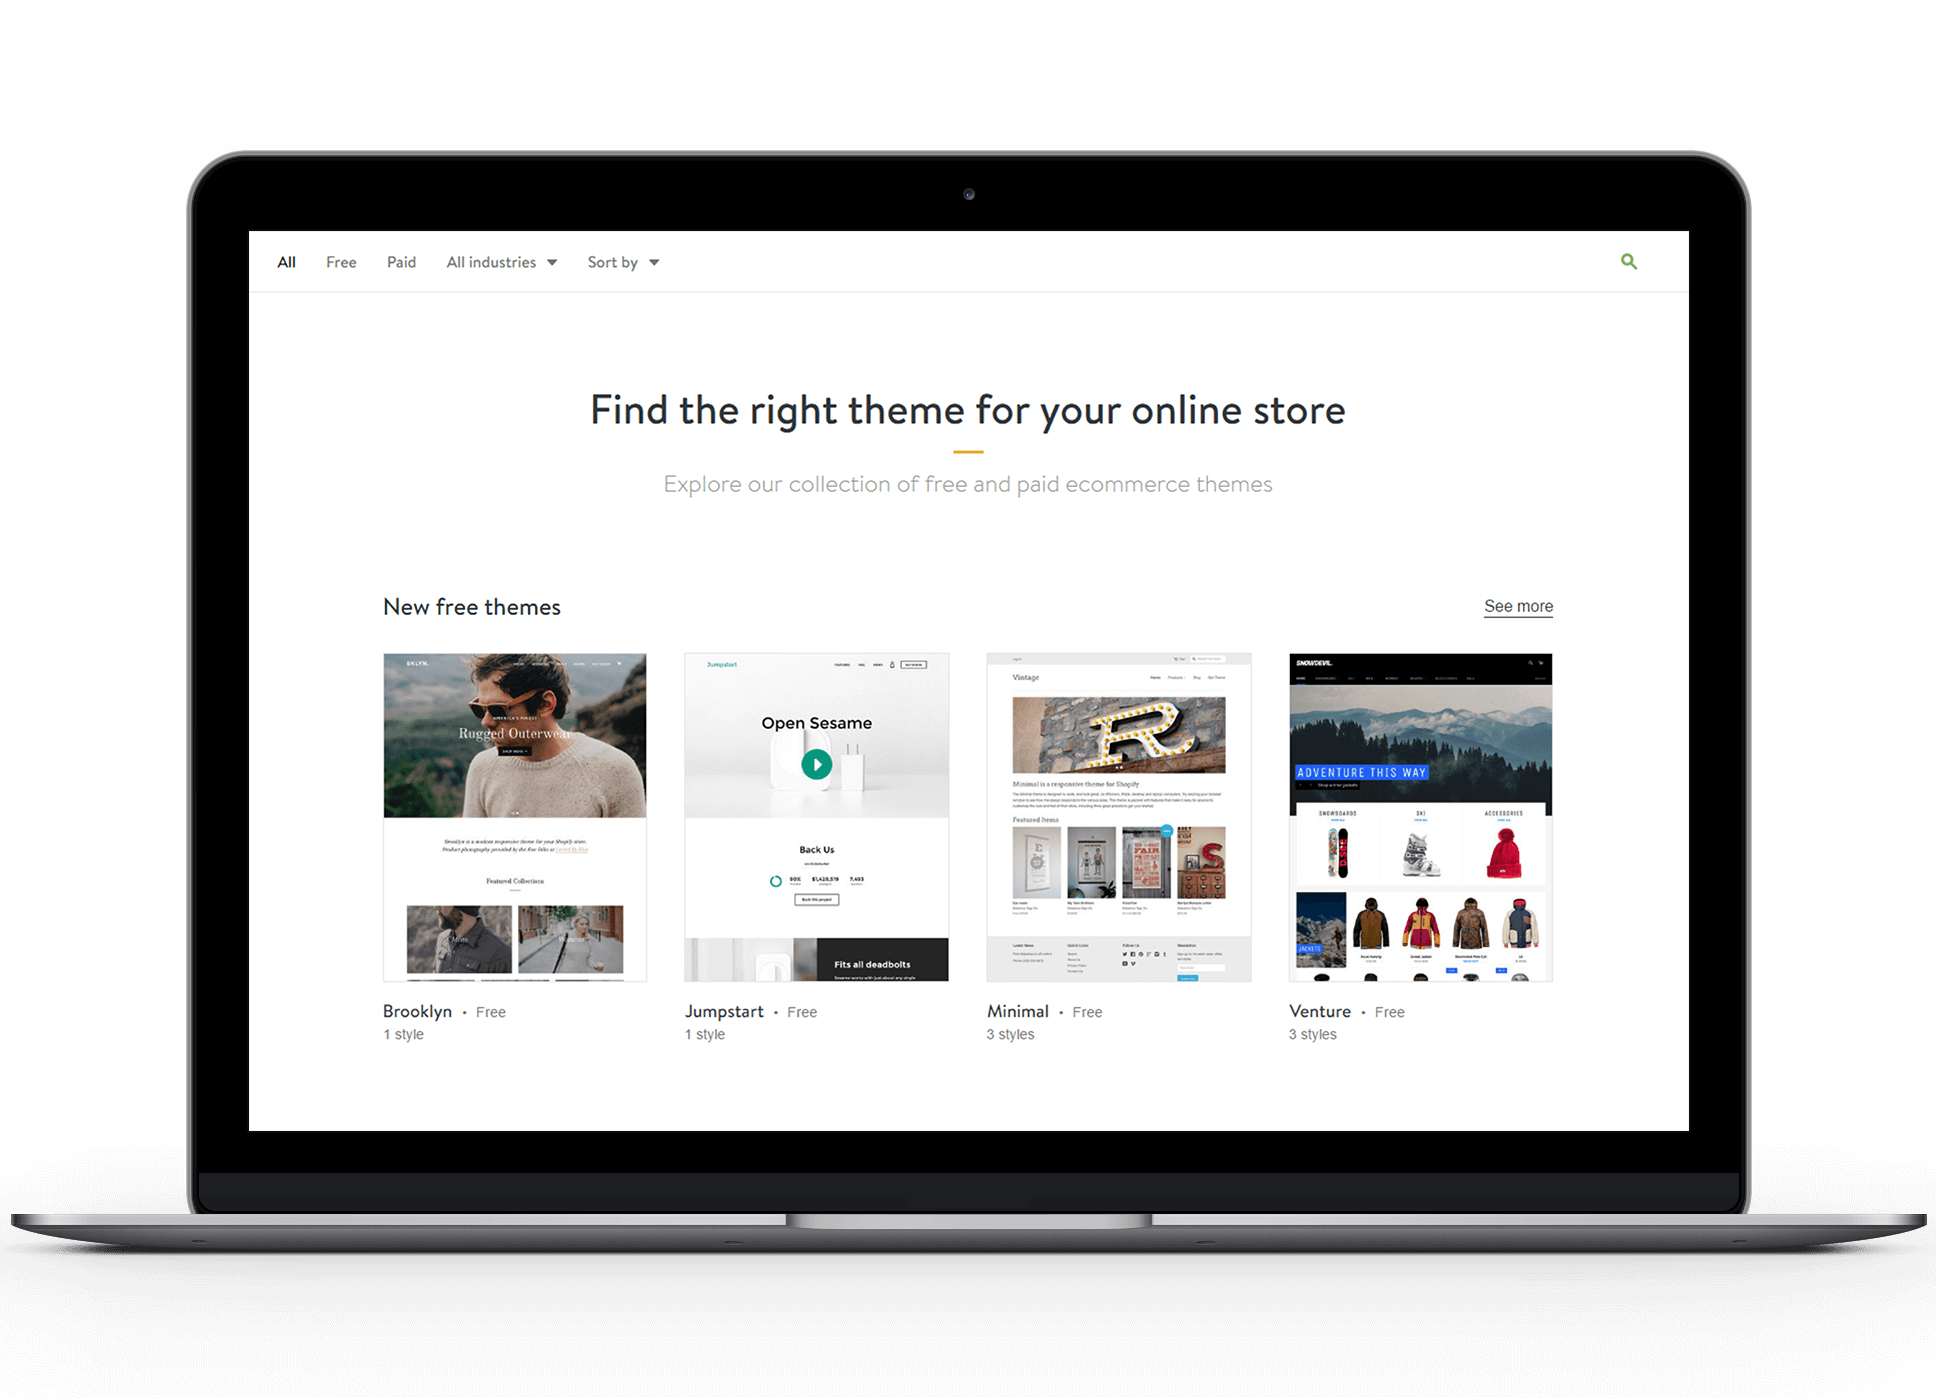 Customizable design with better UI/UX Example